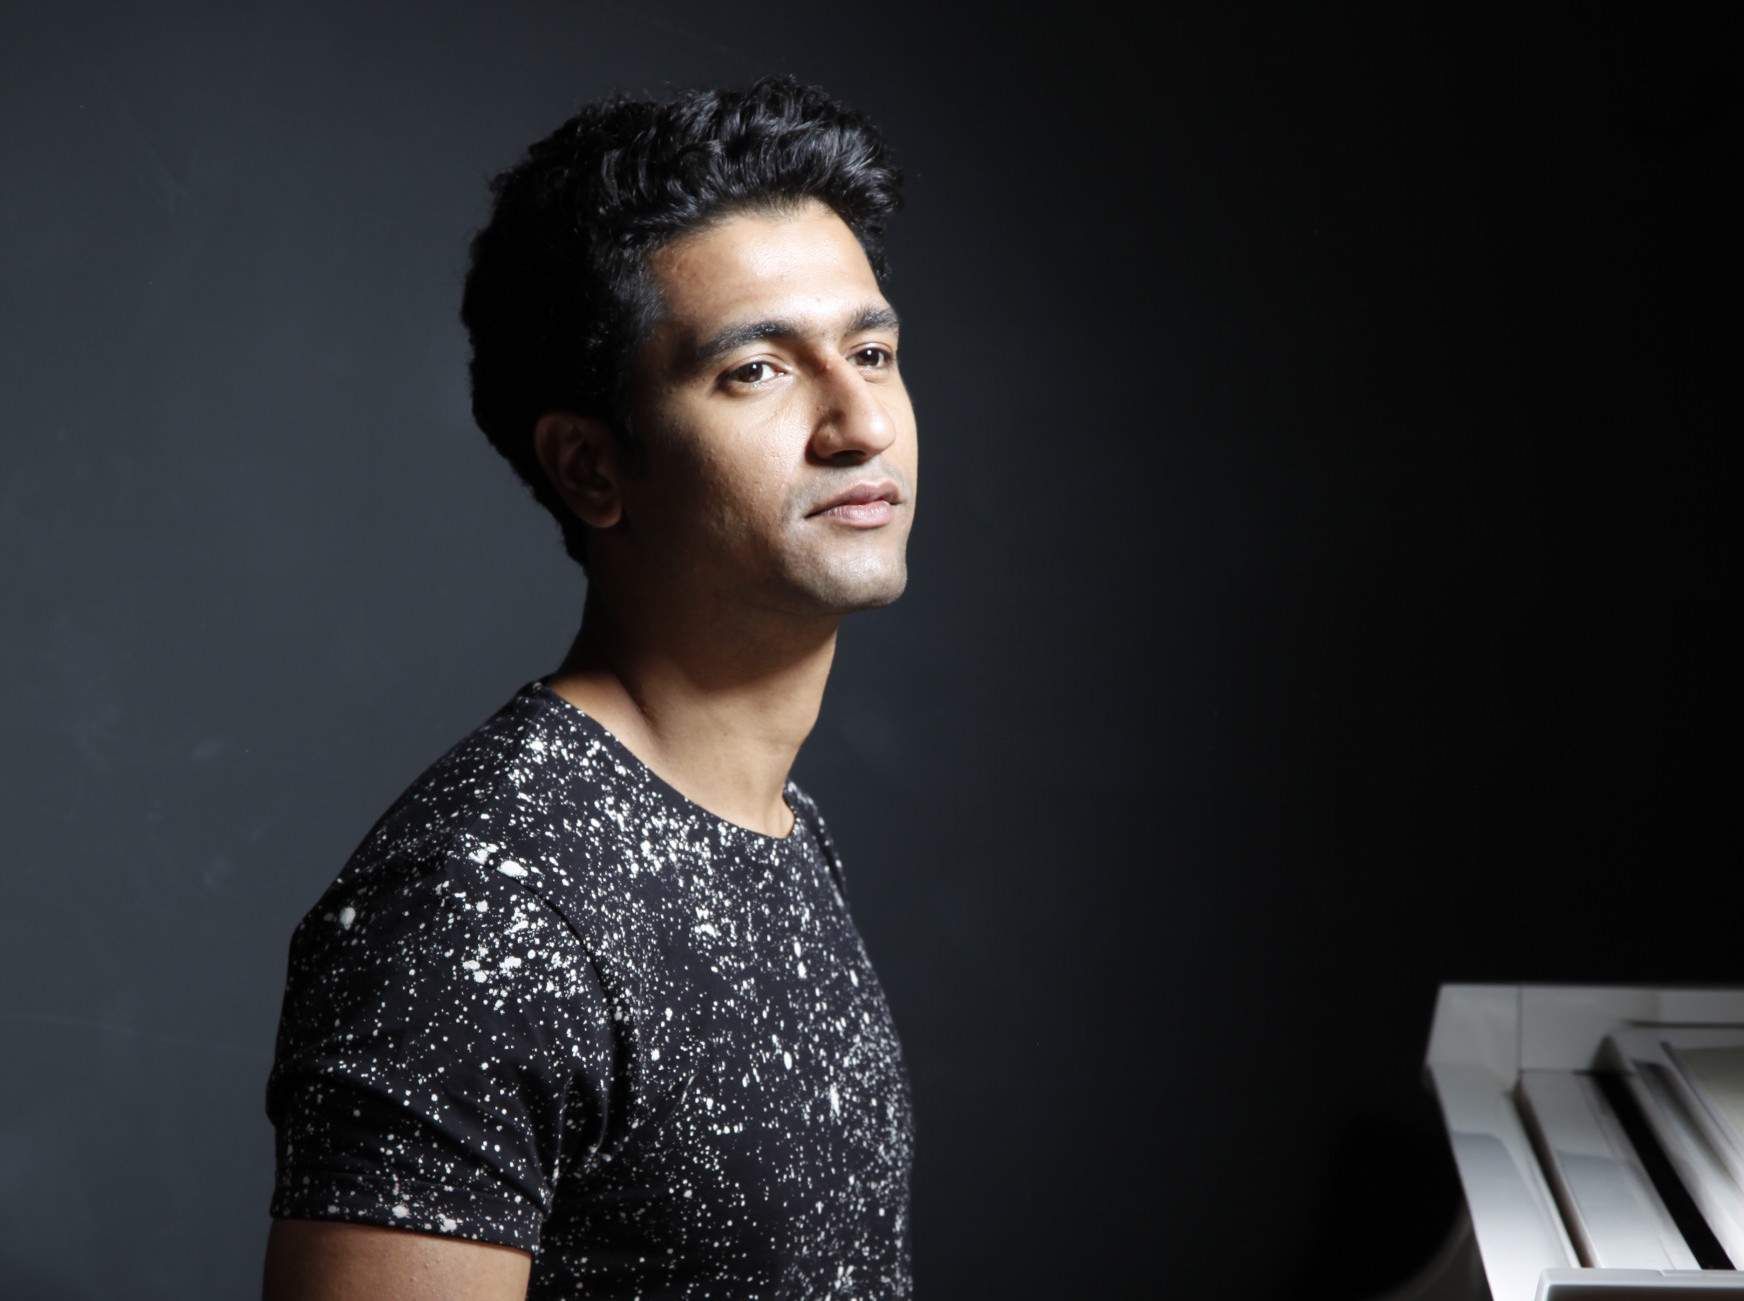 Vicky Kaushal Smart Handsome Image And HD Wallpaper Indiawords